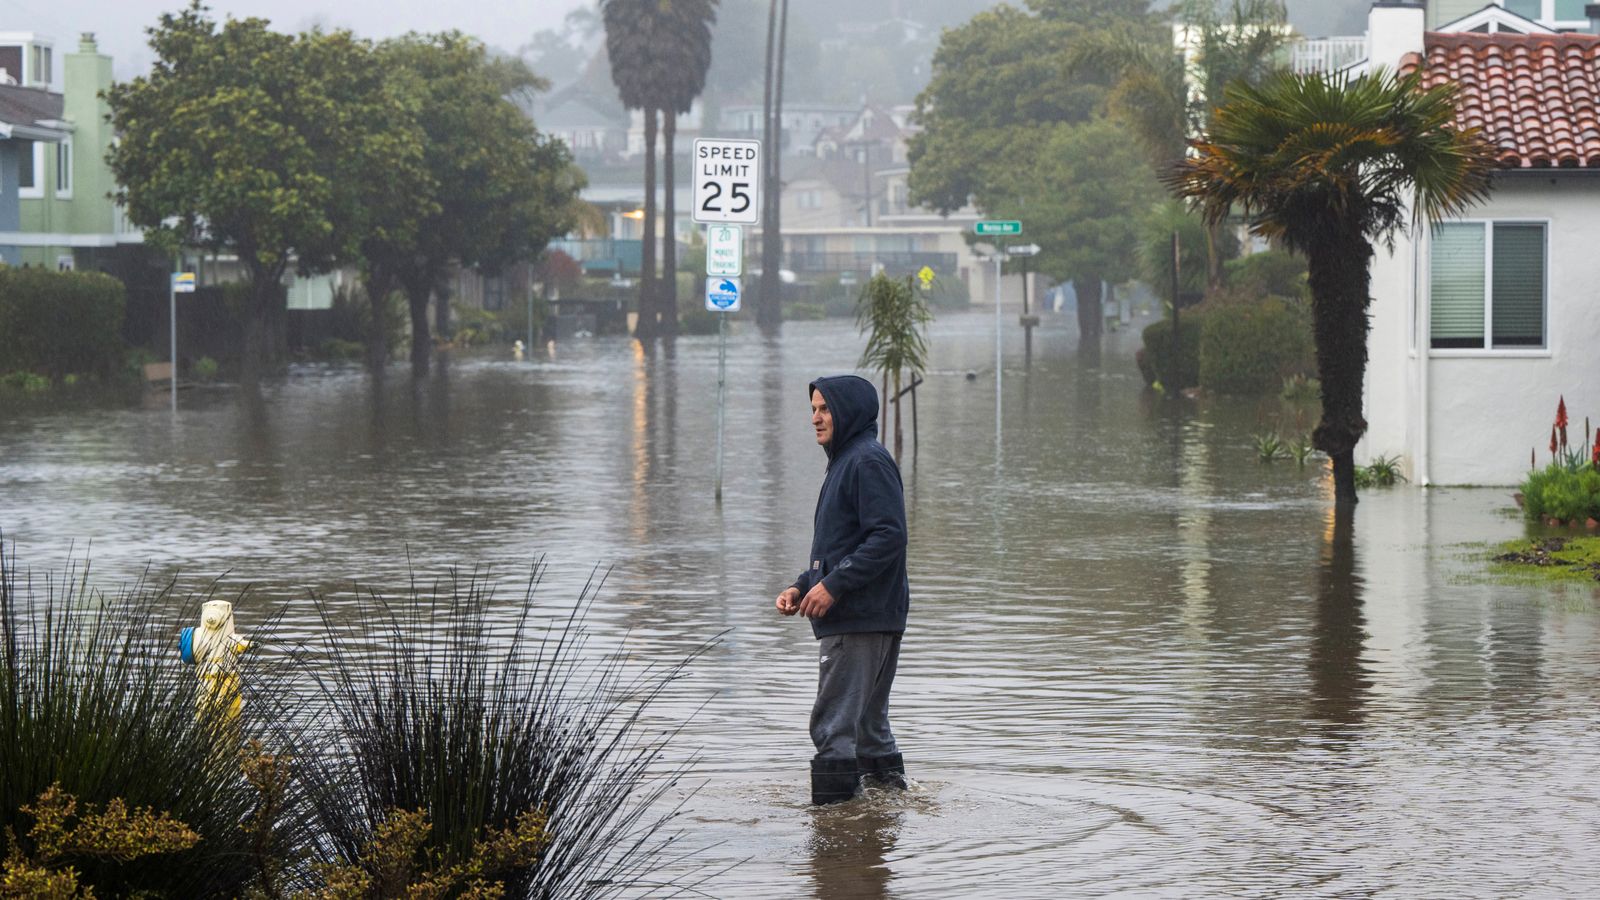 California: Entire community of Montecito ordered to evacuate as storms continue to batter state